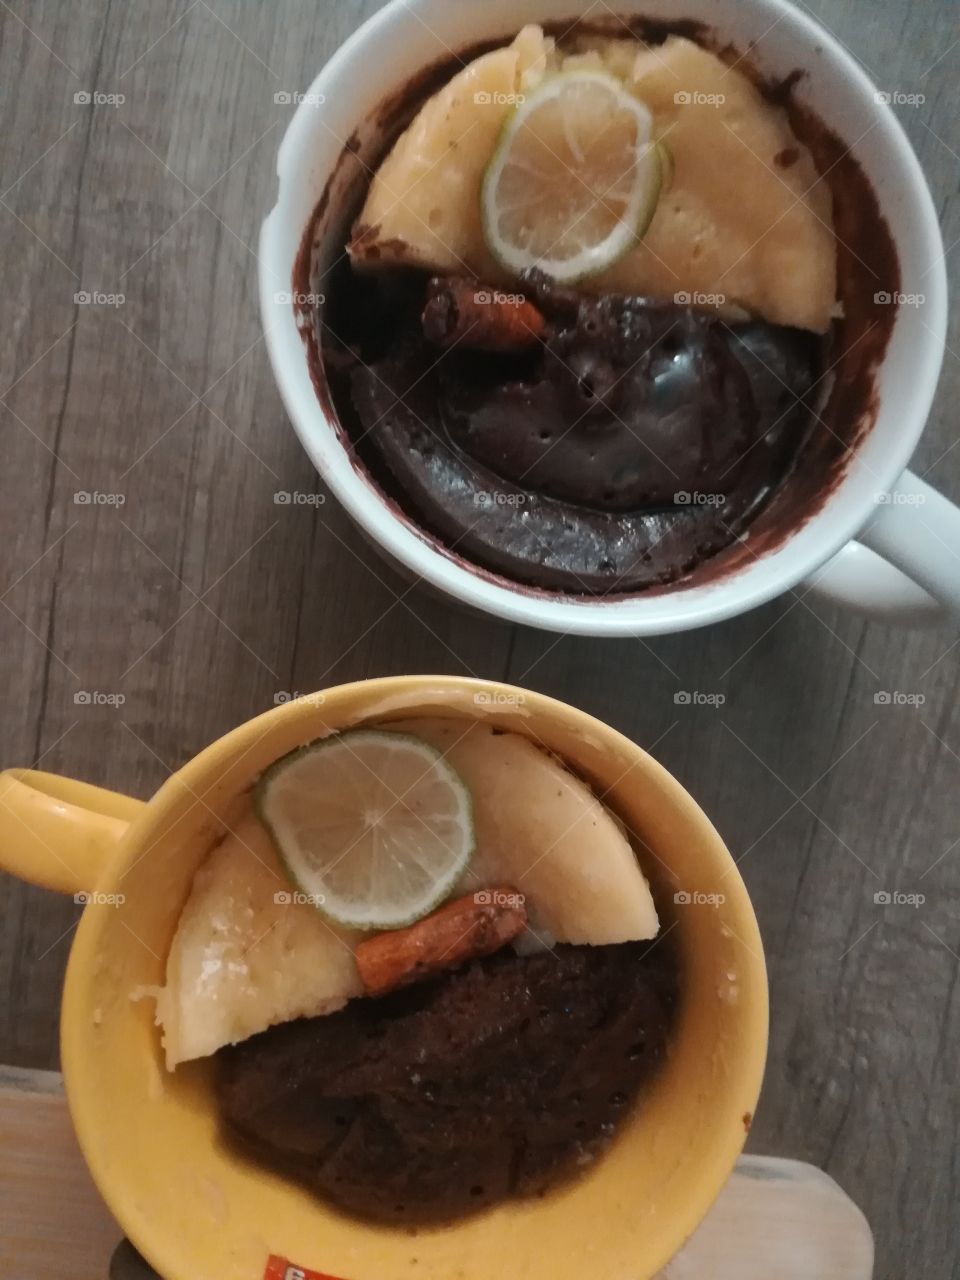 Pudding in a cup